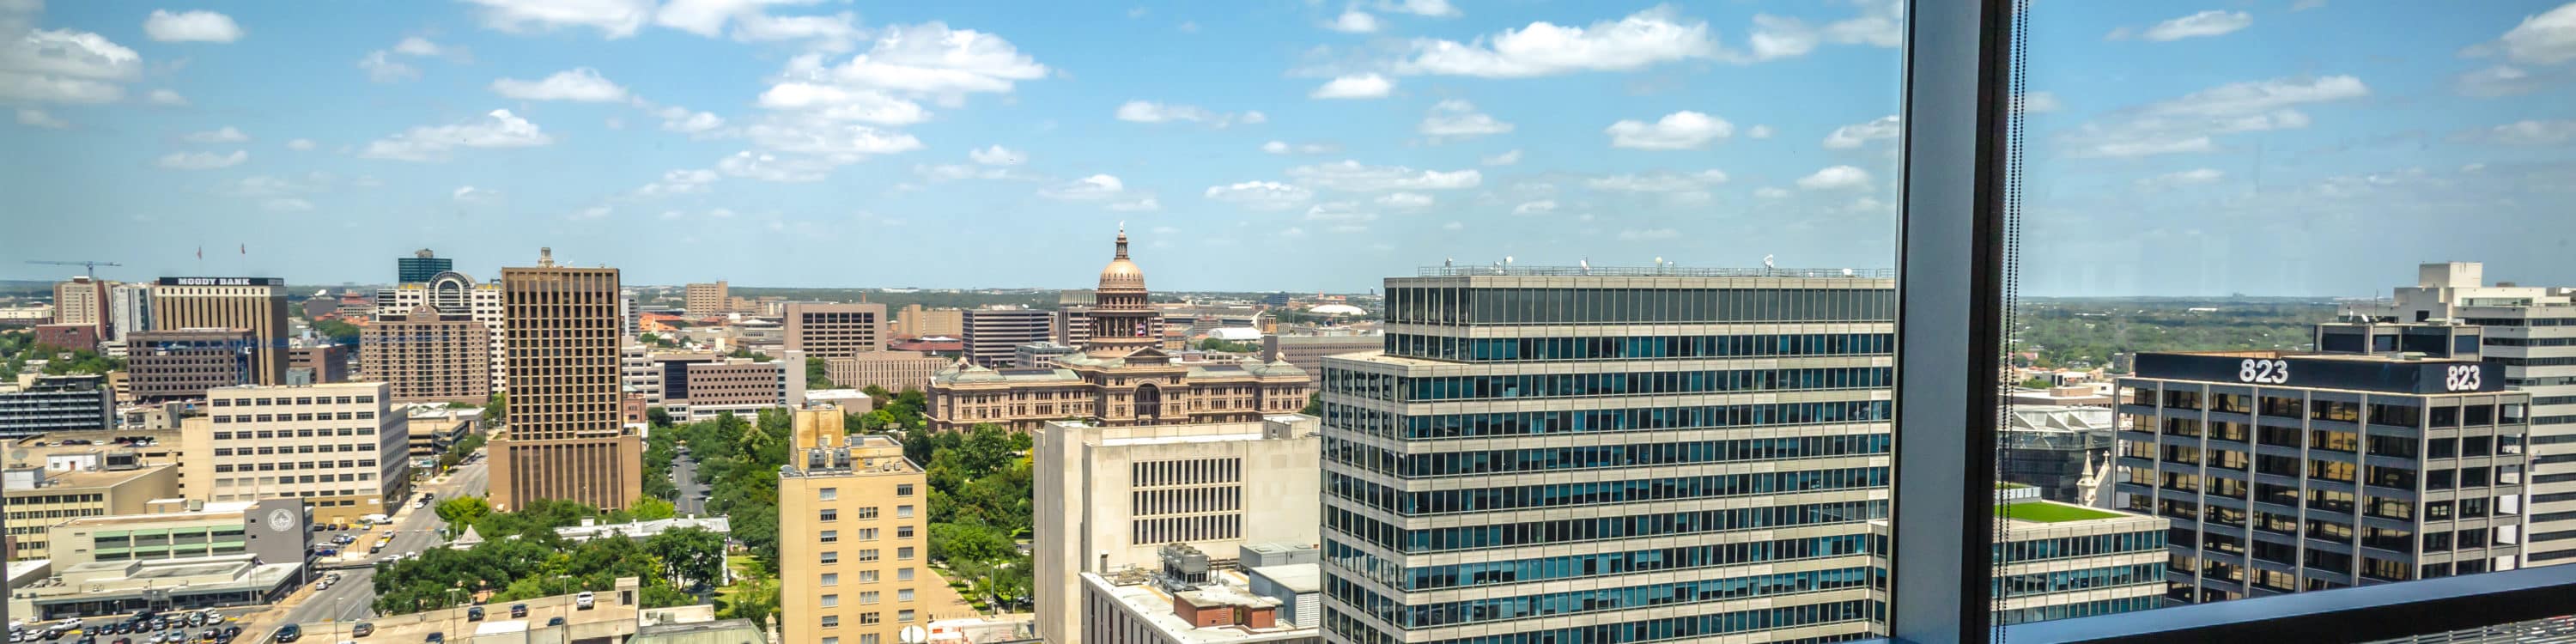 210 West 7th Street | The University of Texas System Building Views